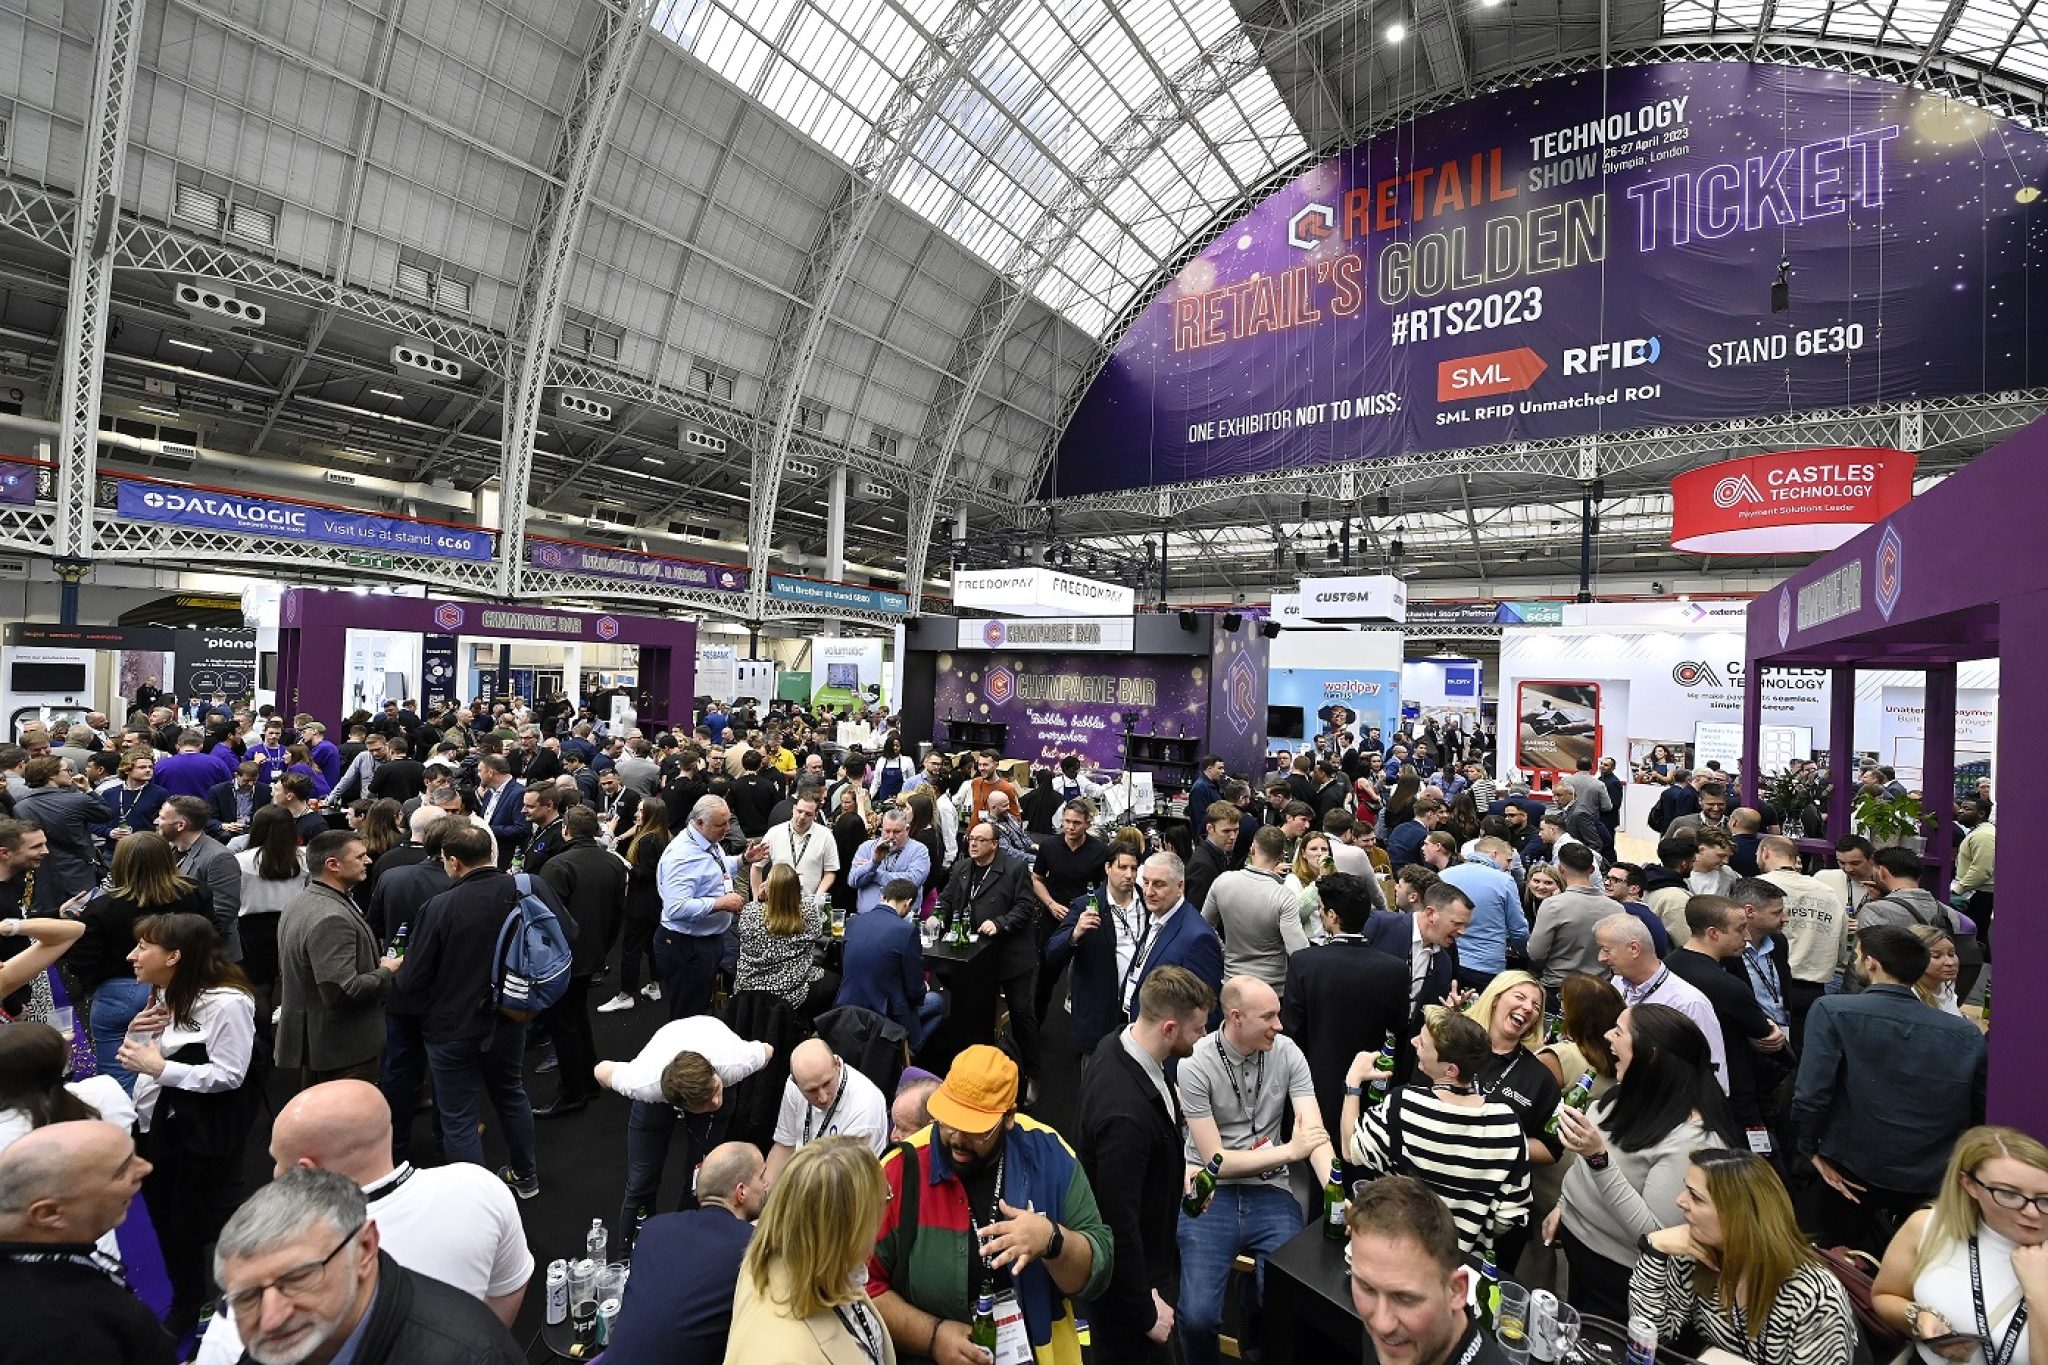 Retail Technology Show returns to Olympia London on 24-25 April 2024